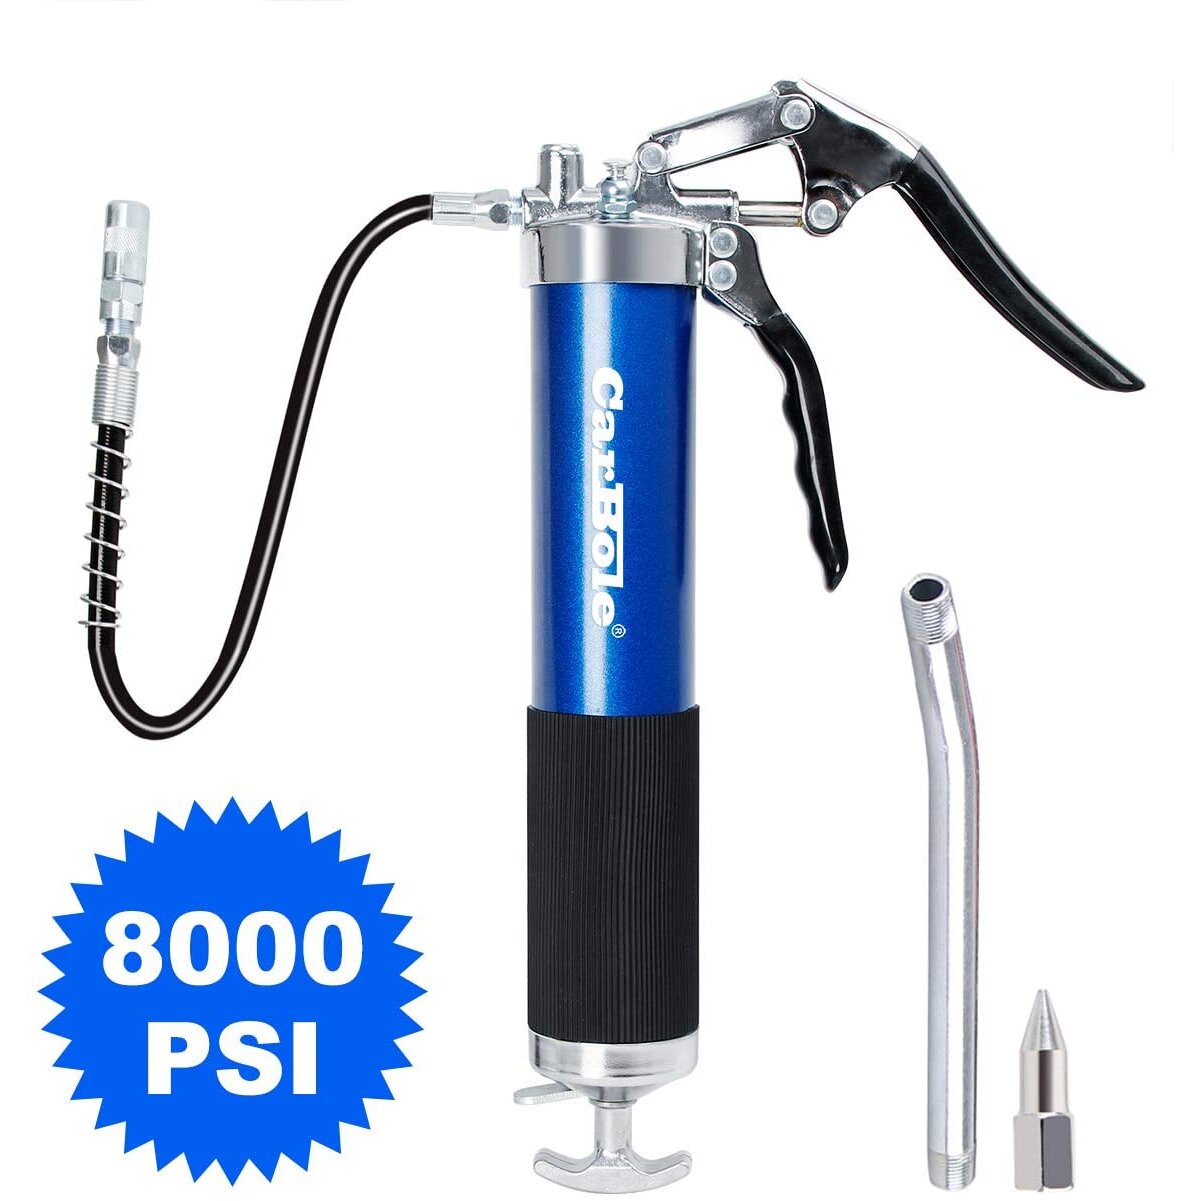 CarBole Heavy Duty Professional Grease Gun 8000 PSI High Pressure Pistol Grip Handle Fit 14oz Cartriage and Bulk With 18 inch Flex Hose